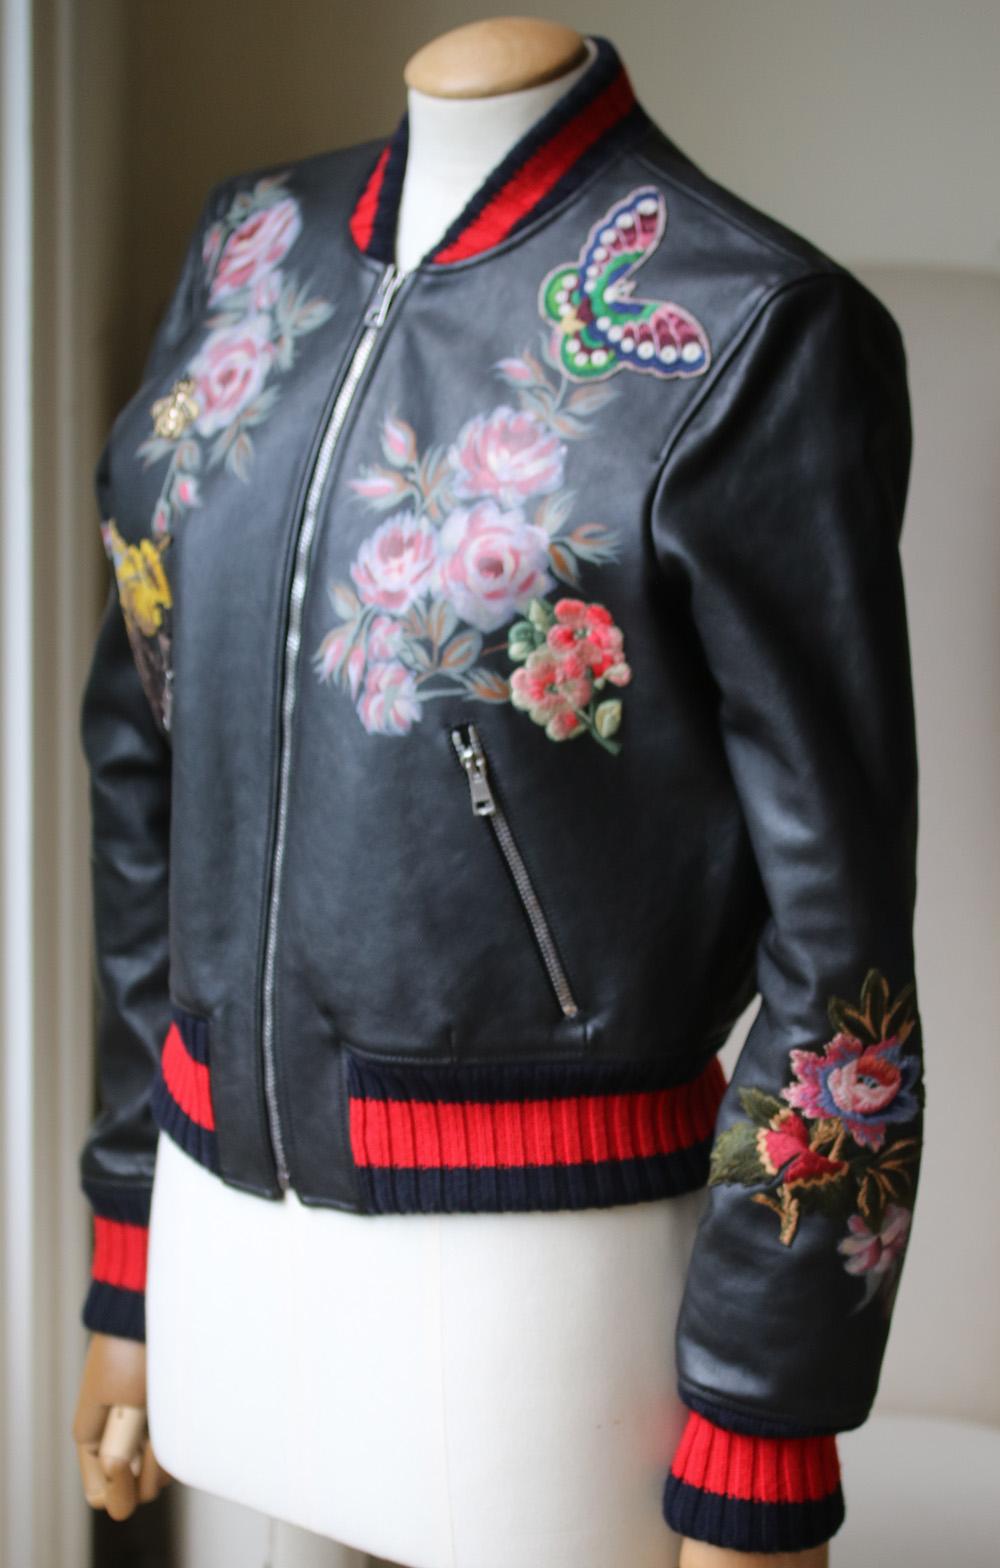 Alessandro Michele's instantly recognizable motifs adorn this editor-approved bomber jacket from Gucci. Leave an unforgettable impression. The black leather is contrasted with red and black detailing at the collar and hem, while the appliqued hand